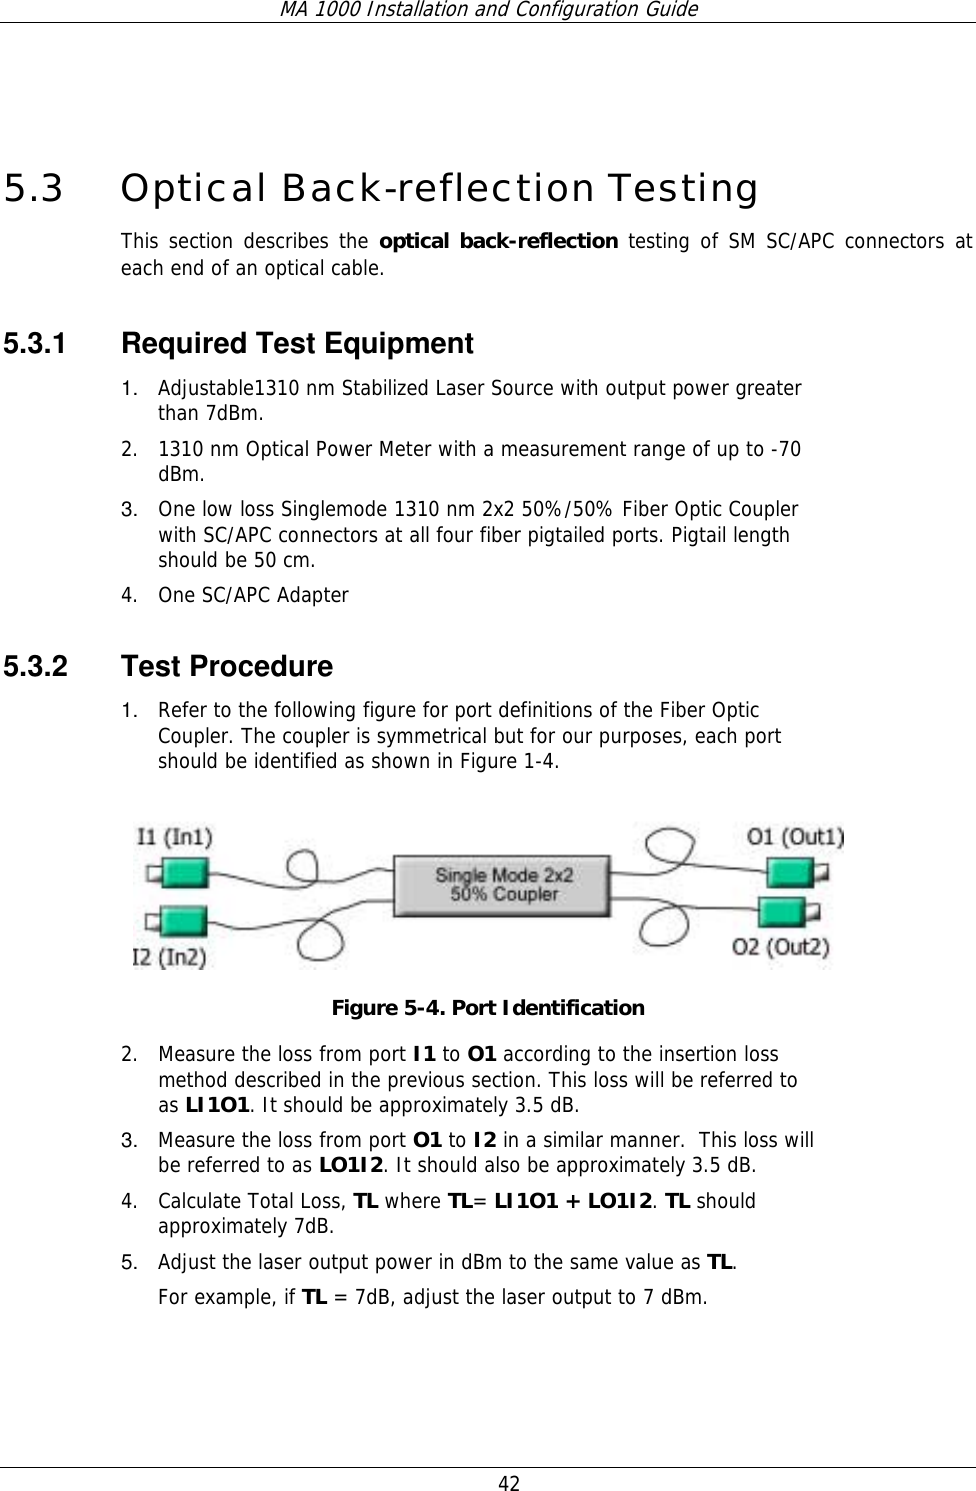 MA 1000 Installation and Configuration Guide  42        5.3 Optical Back-reflection Testing This section describes the optical back-reflection testing of SM SC/APC connectors at each end of an optical cable. 5.3.1  Required Test Equipment 1.  Adjustable1310 nm Stabilized Laser Source with output power greater than 7dBm.  2. 1310 nm Optical Power Meter with a measurement range of up to -70 dBm. 3.  One low loss Singlemode 1310 nm 2x2 50%/50% Fiber Optic Coupler with SC/APC connectors at all four fiber pigtailed ports. Pigtail length should be 50 cm.  4. One SC/APC Adapter 5.3.2 Test Procedure 1.  Refer to the following figure for port definitions of the Fiber Optic Coupler. The coupler is symmetrical but for our purposes, each port should be identified as shown in Figure 1-4.  Figure  5-4. Port Identification 2. Measure the loss from port I1 to O1 according to the insertion loss method described in the previous section. This loss will be referred to as LI1O1. It should be approximately 3.5 dB.  3.  Measure the loss from port O1 to I2 in a similar manner.  This loss will be referred to as LO1I2. It should also be approximately 3.5 dB.  4. Calculate Total Loss, TL where TL= LI1O1 + LO1I2. TL should approximately 7dB. 5.  Adjust the laser output power in dBm to the same value as TL.  For example, if TL = 7dB, adjust the laser output to 7 dBm. 